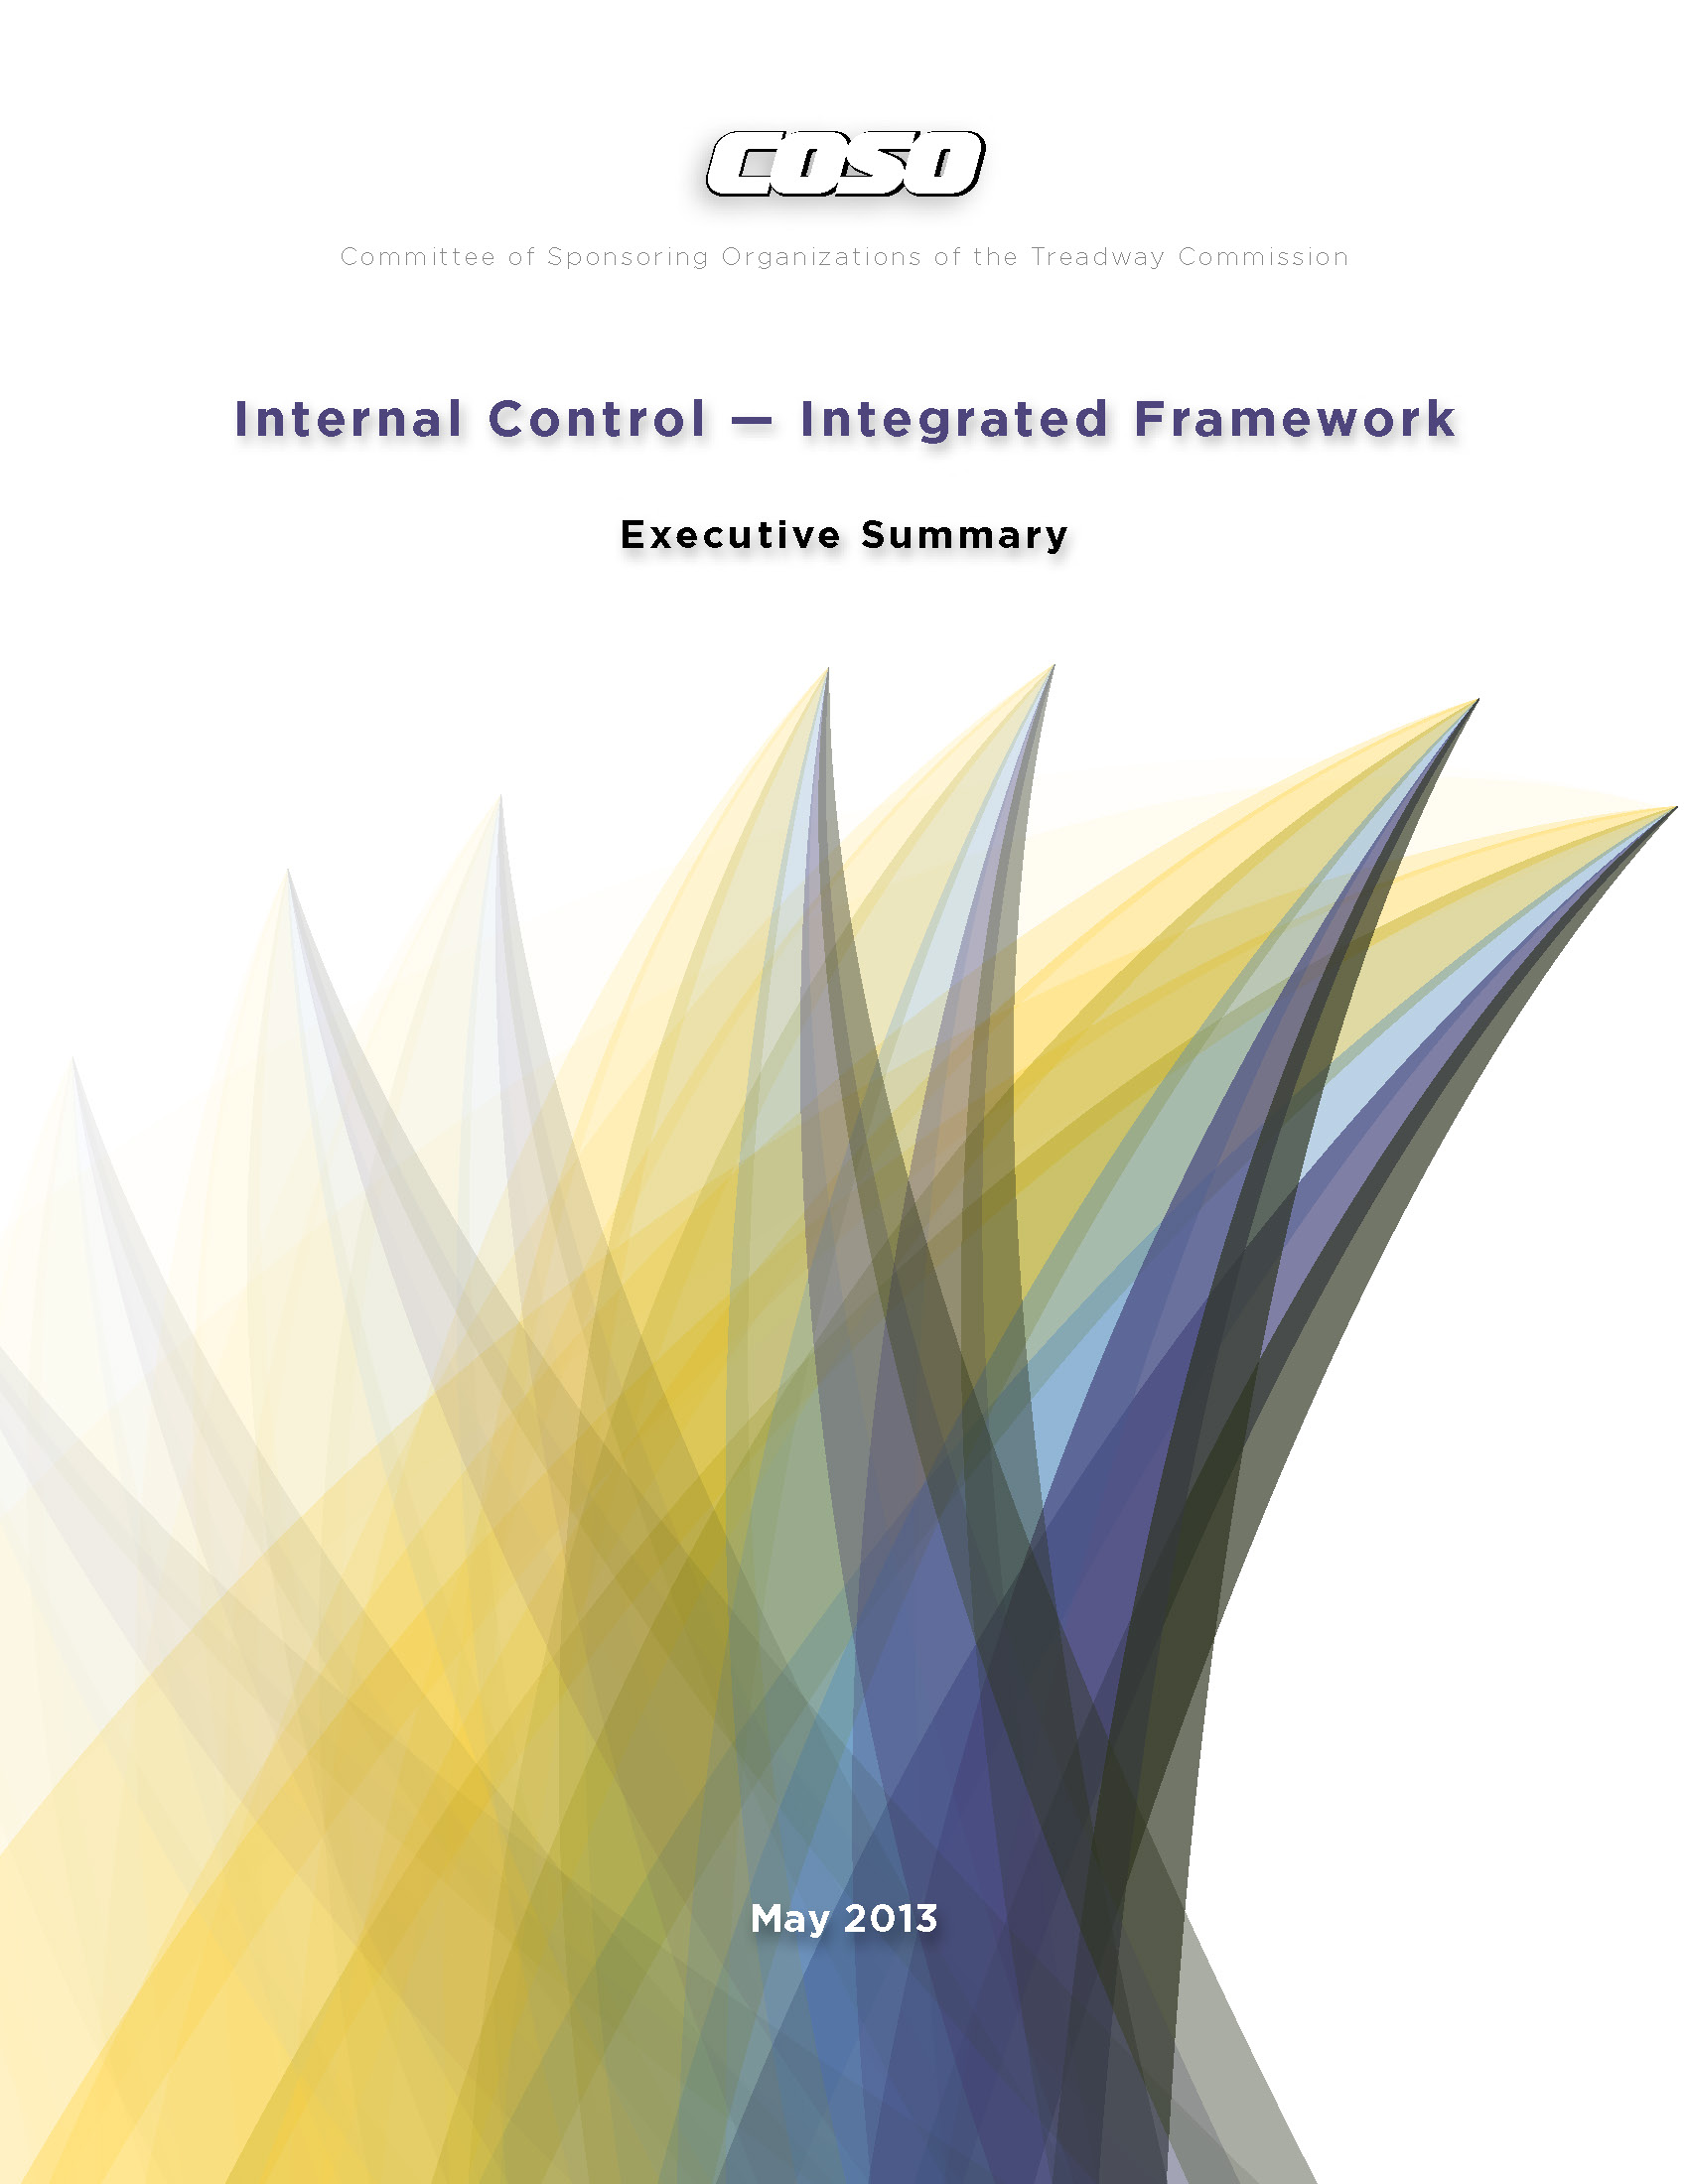 COSO Internal Controls Guide: Integrated Framework